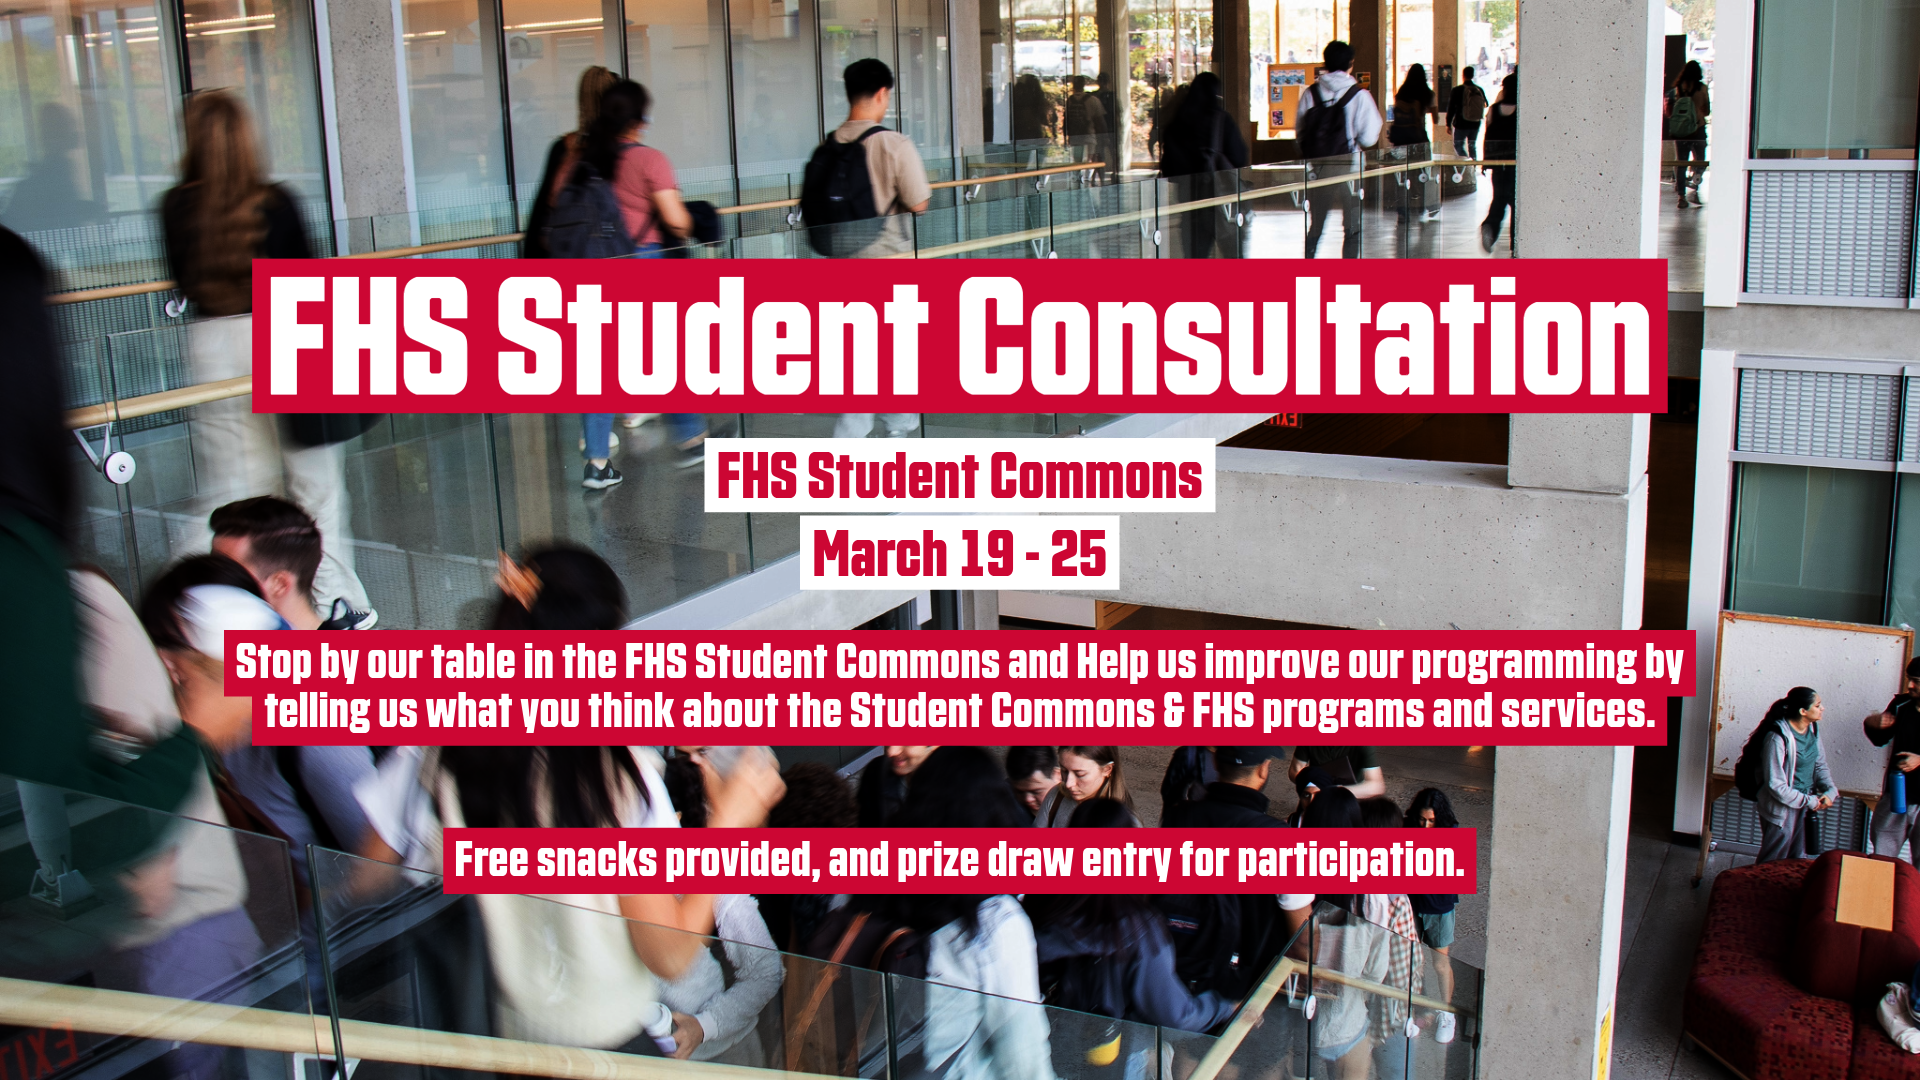 March 18-25: FHS Student Consultation